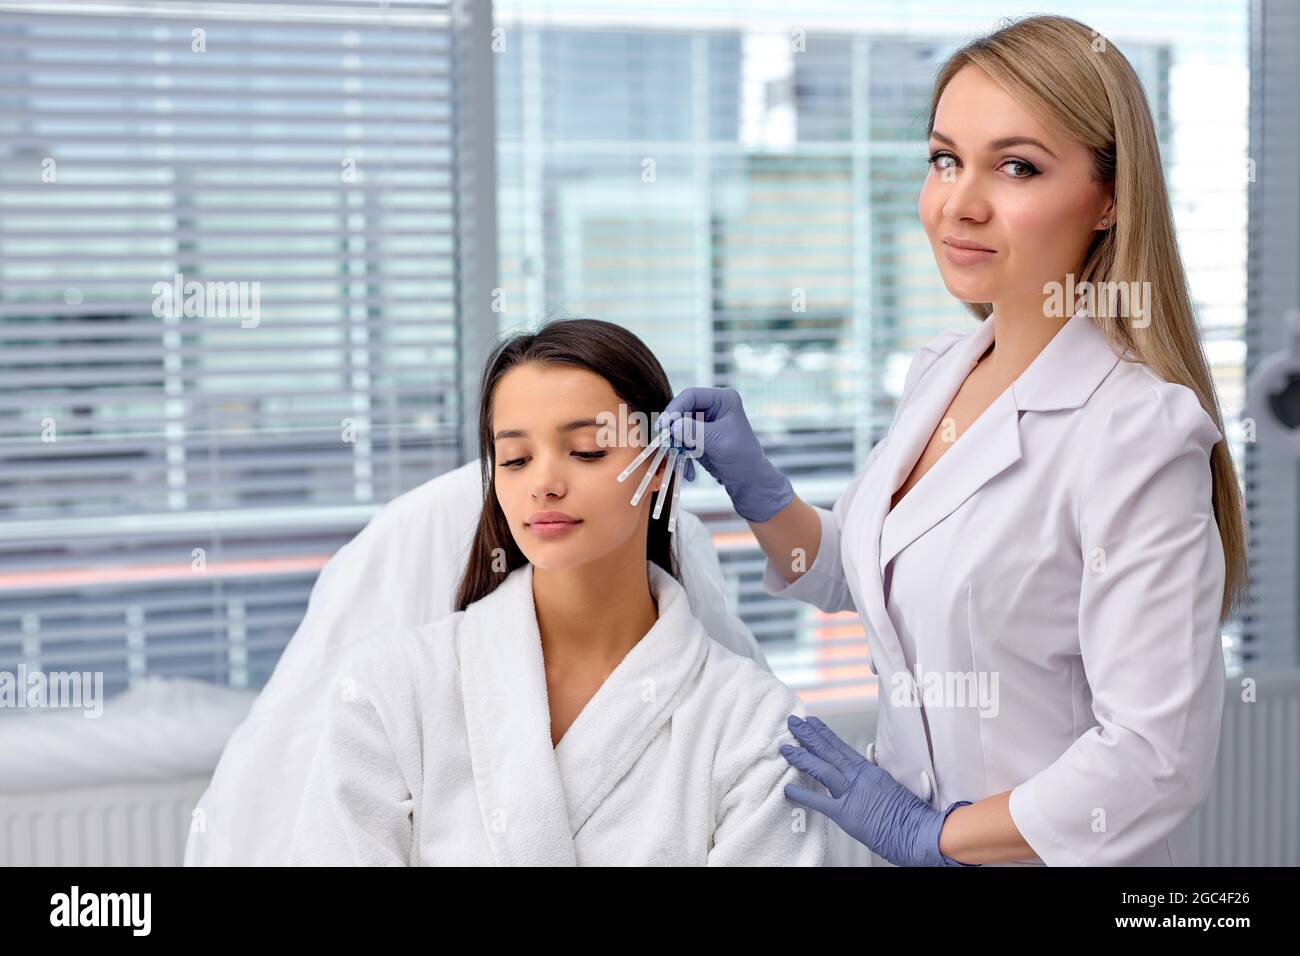 healthcare, medical and surgery concept. beautician or doctor with patient, preparing to do injection, Thread Lifting, PDO thread. Aesthetic beauty an Stock Photo